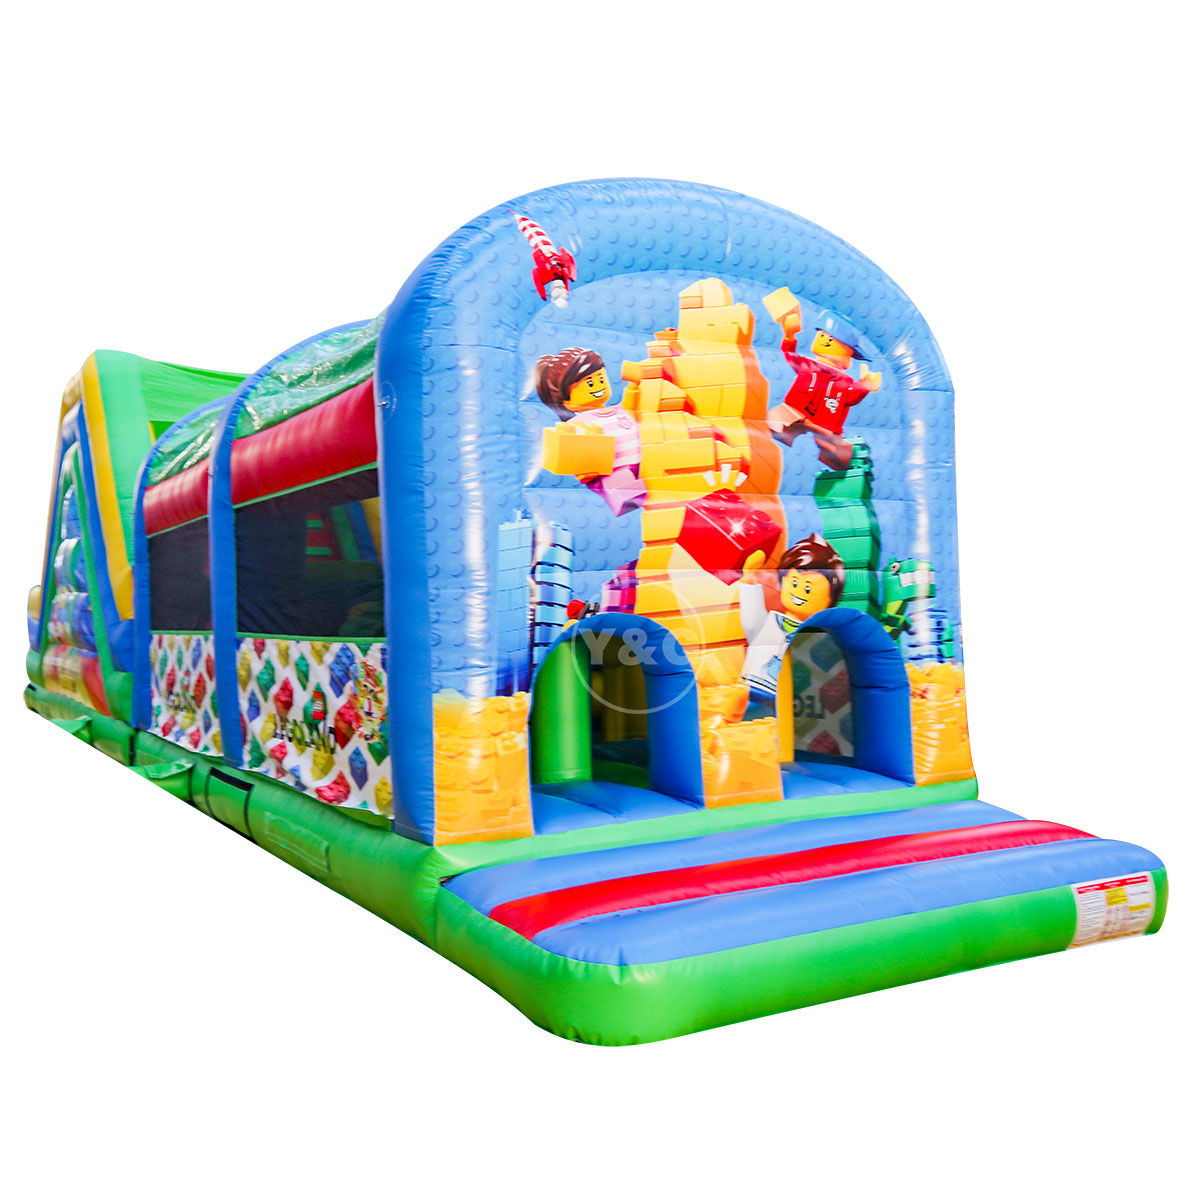 Inflatable LEGO obstacle courseYGO70